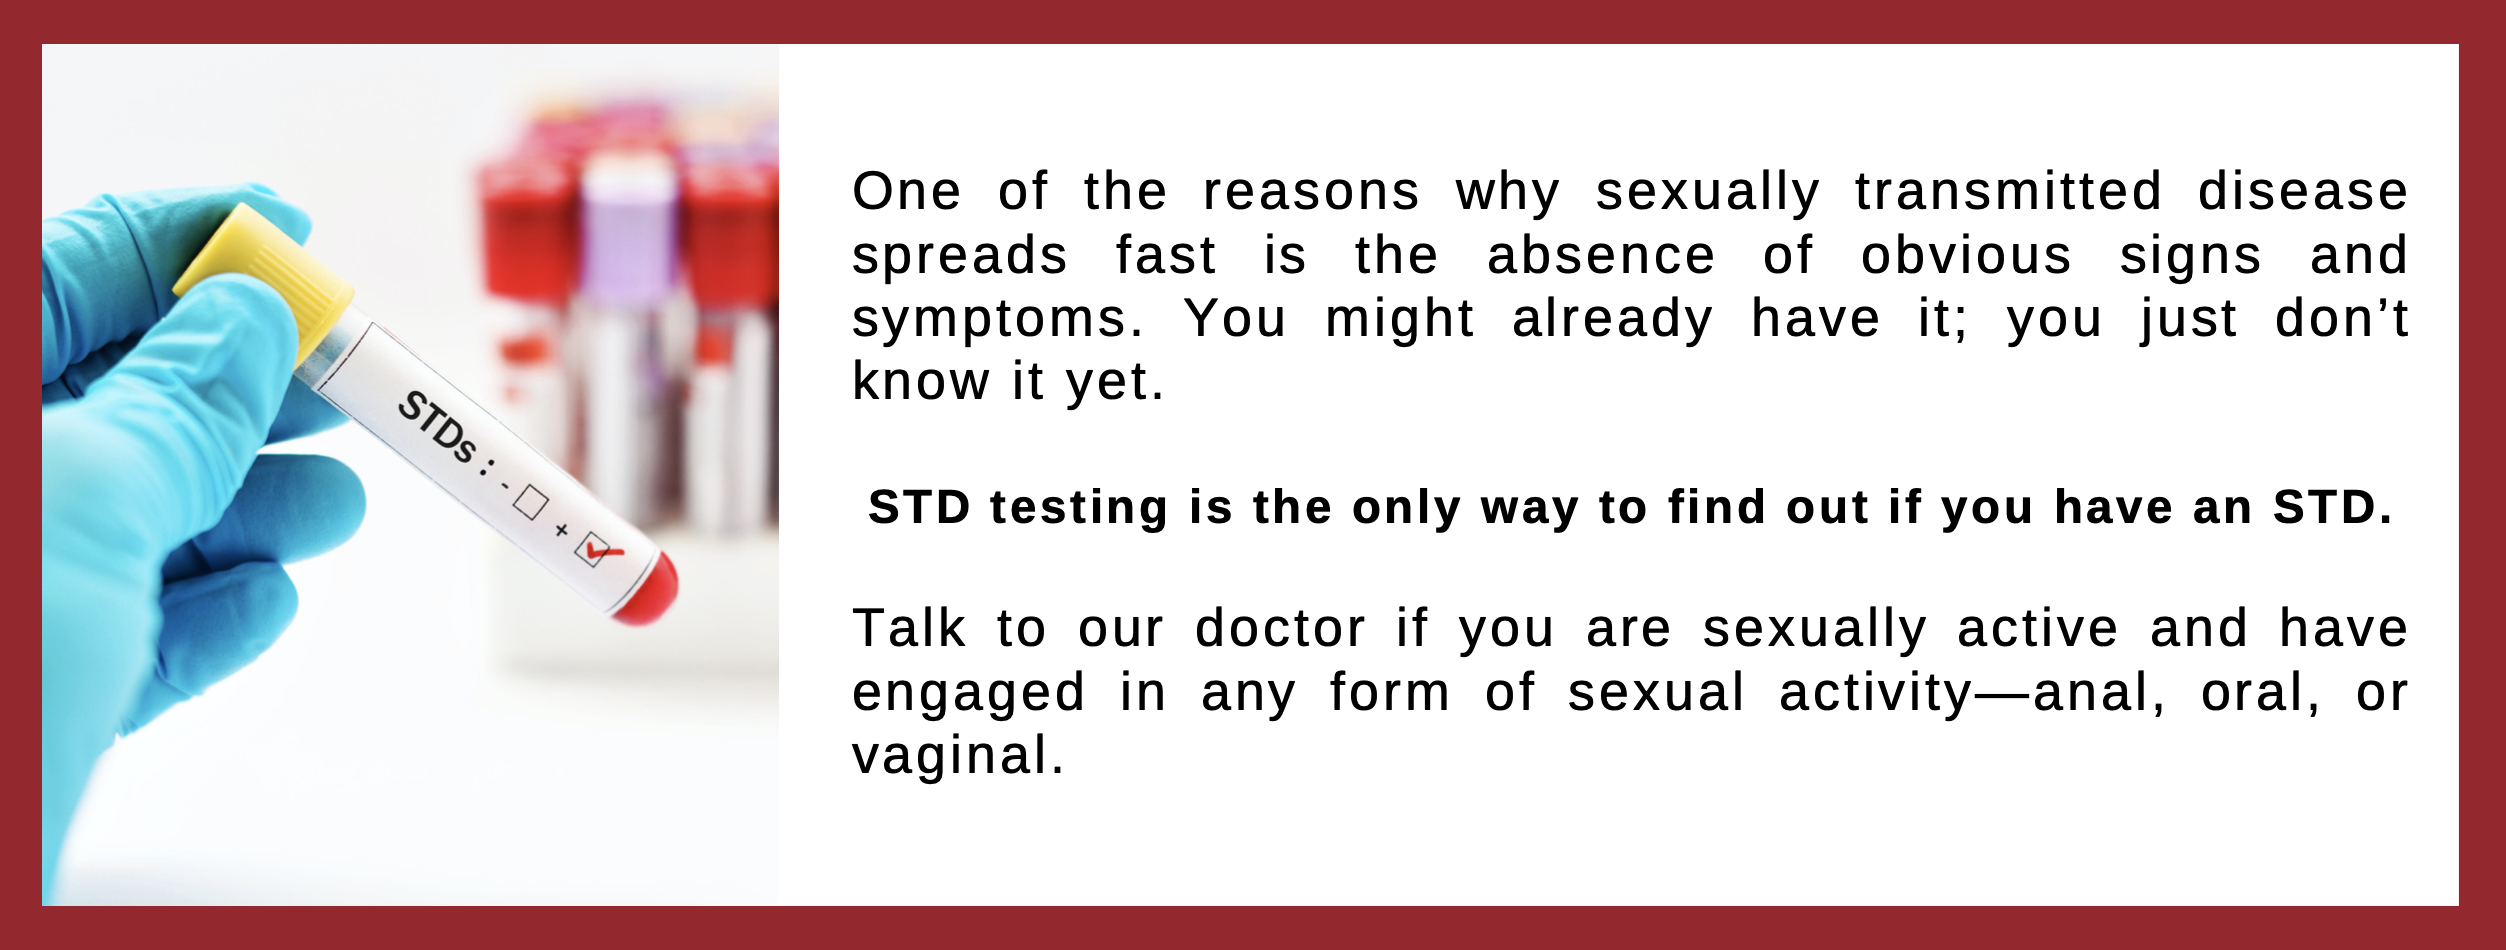 How do you know id you have a std